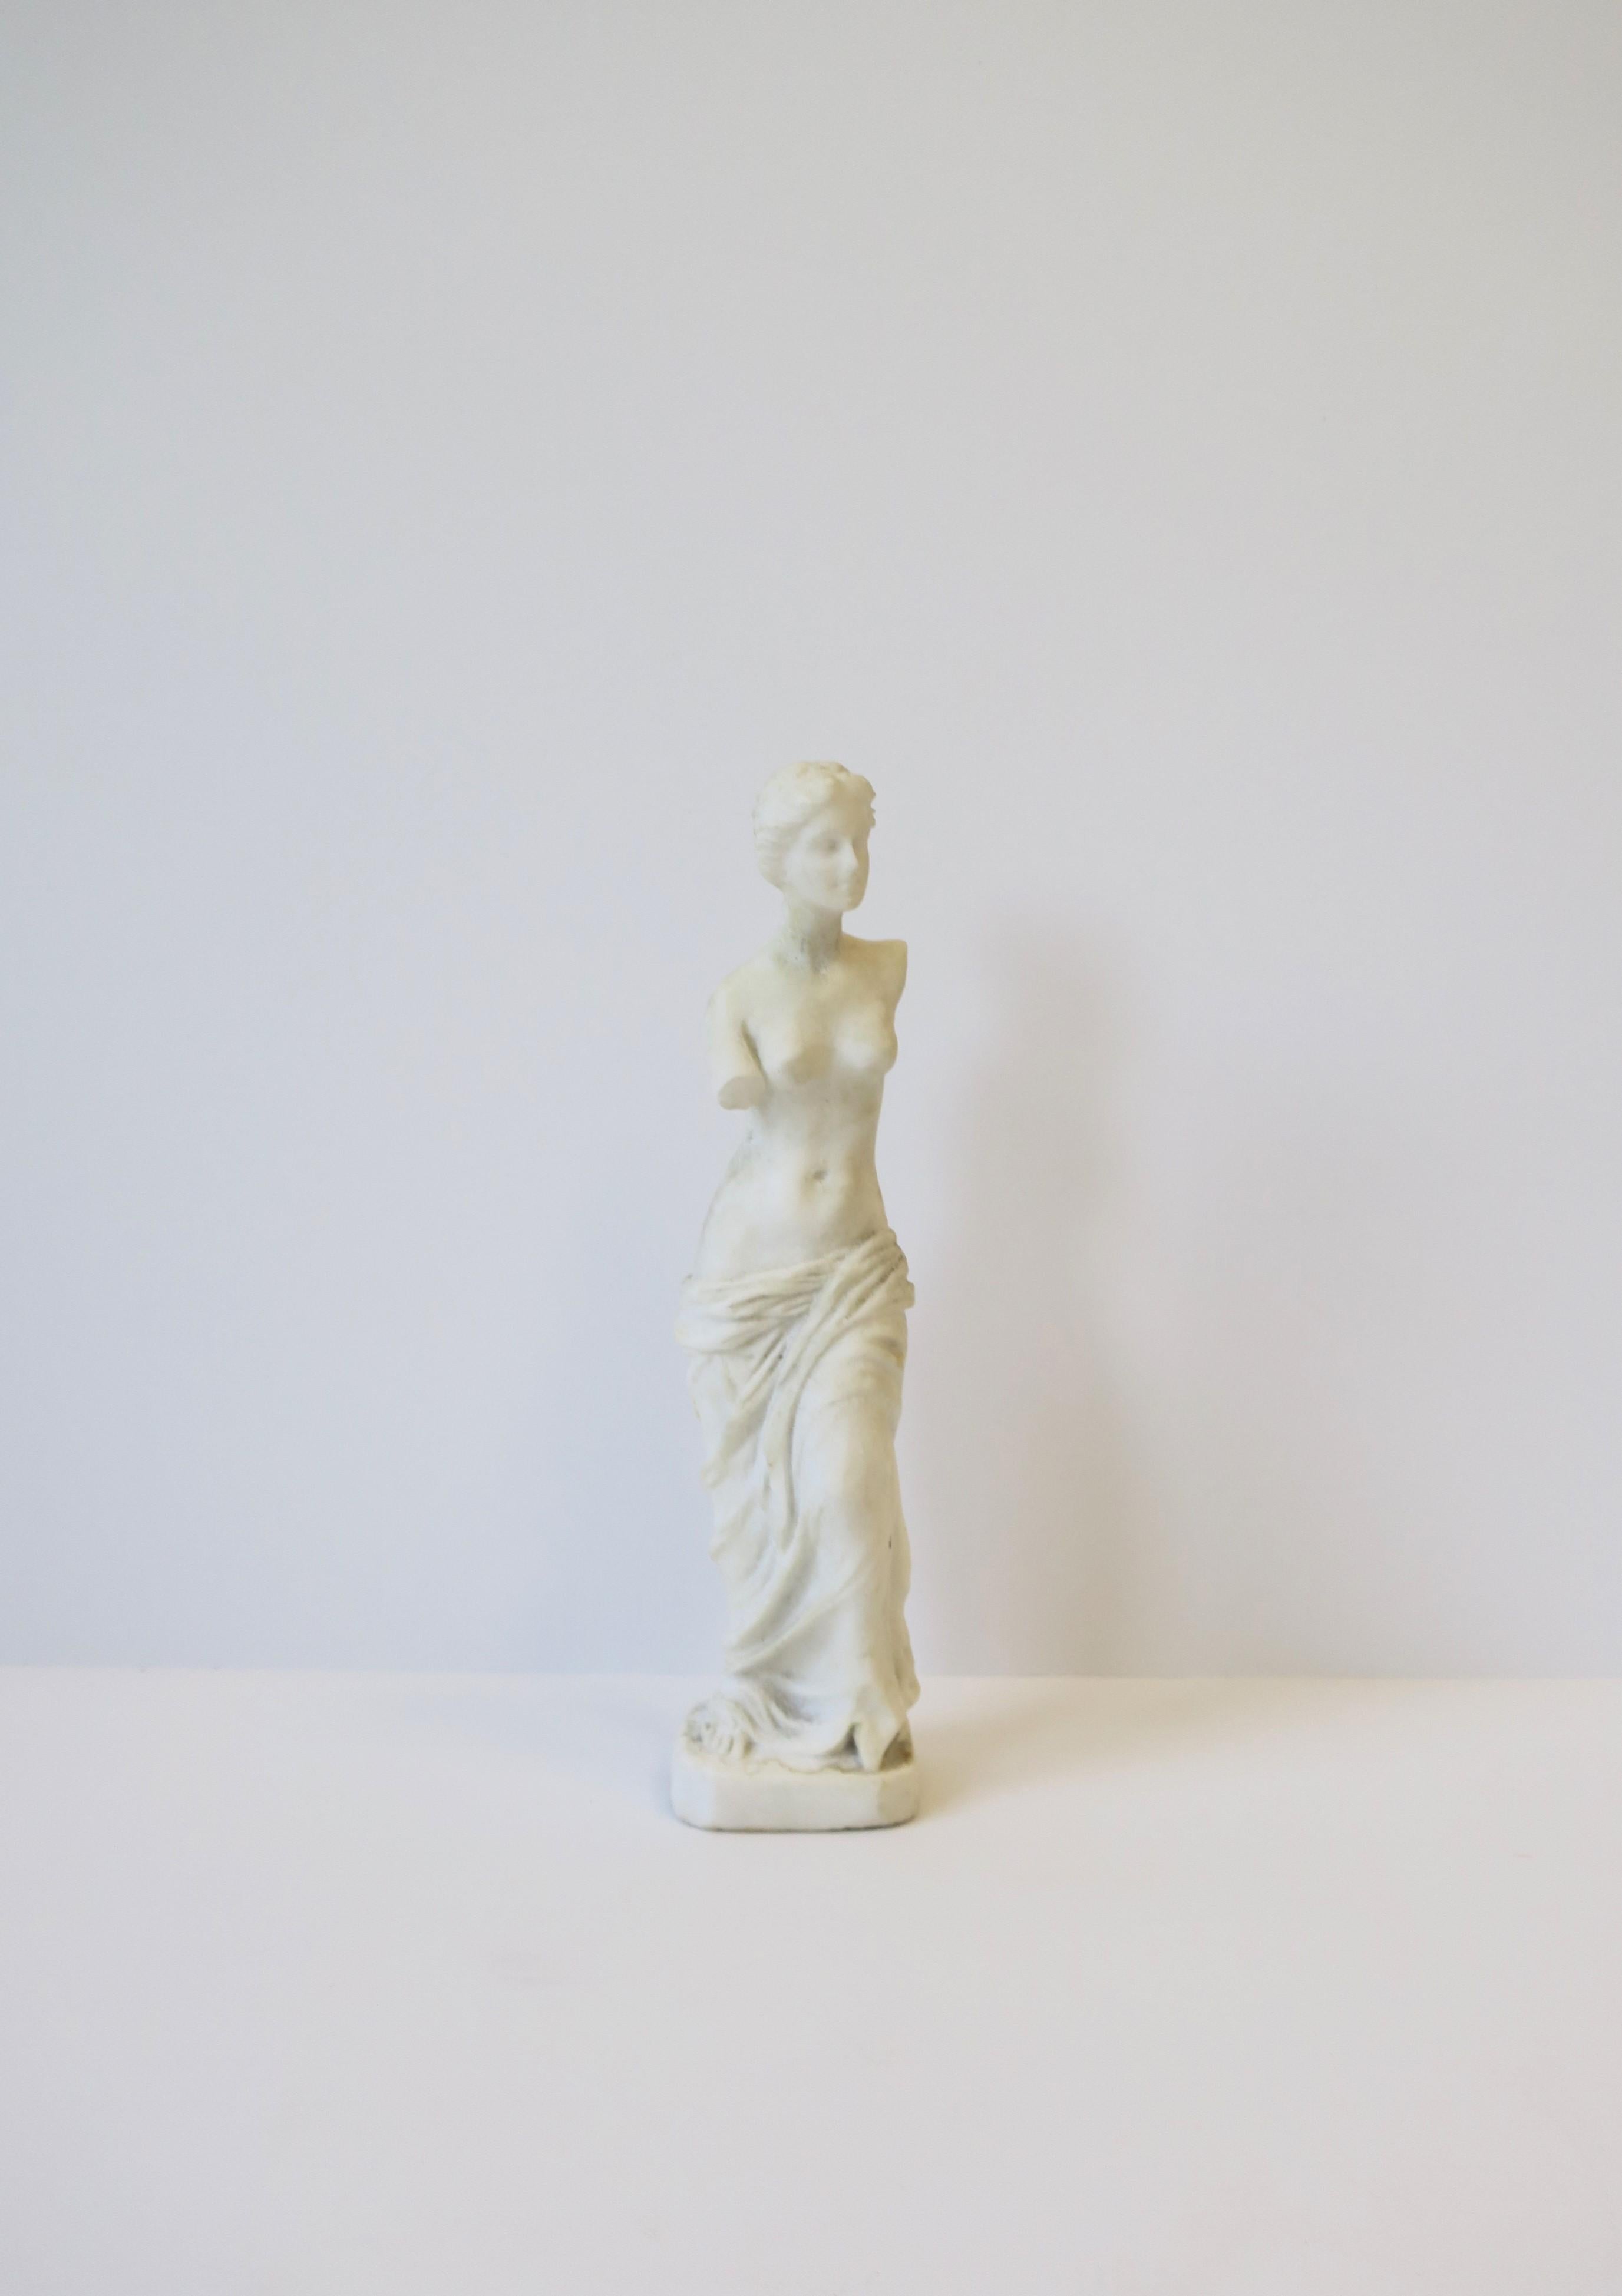 A beautiful white granite marble reproduction of Greek goddess 'Venus de Milo' female figure statue sculpture in the Neoclassical style, circa early 20th century, Italy. A great decorative object as demonstrated in images. Dimensions: 9.5